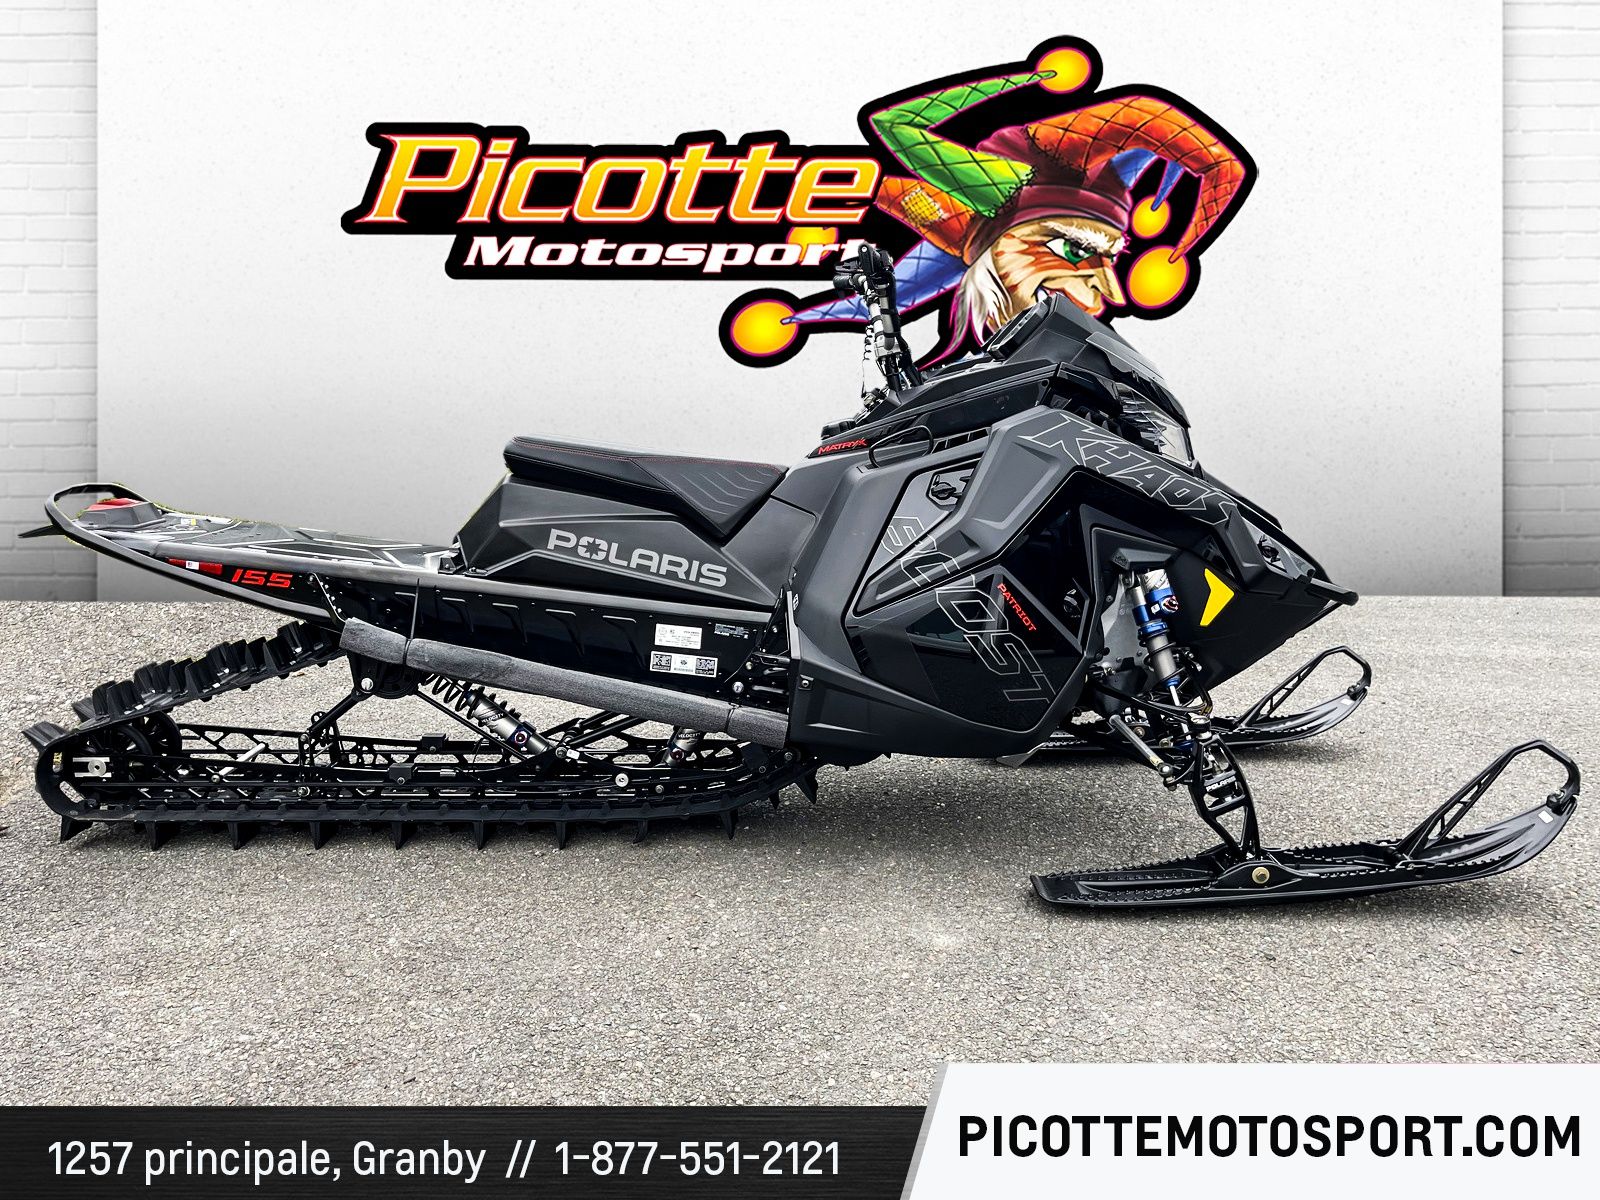 Picotte Motosport | Snowmobile Polaris in our Complete inventory